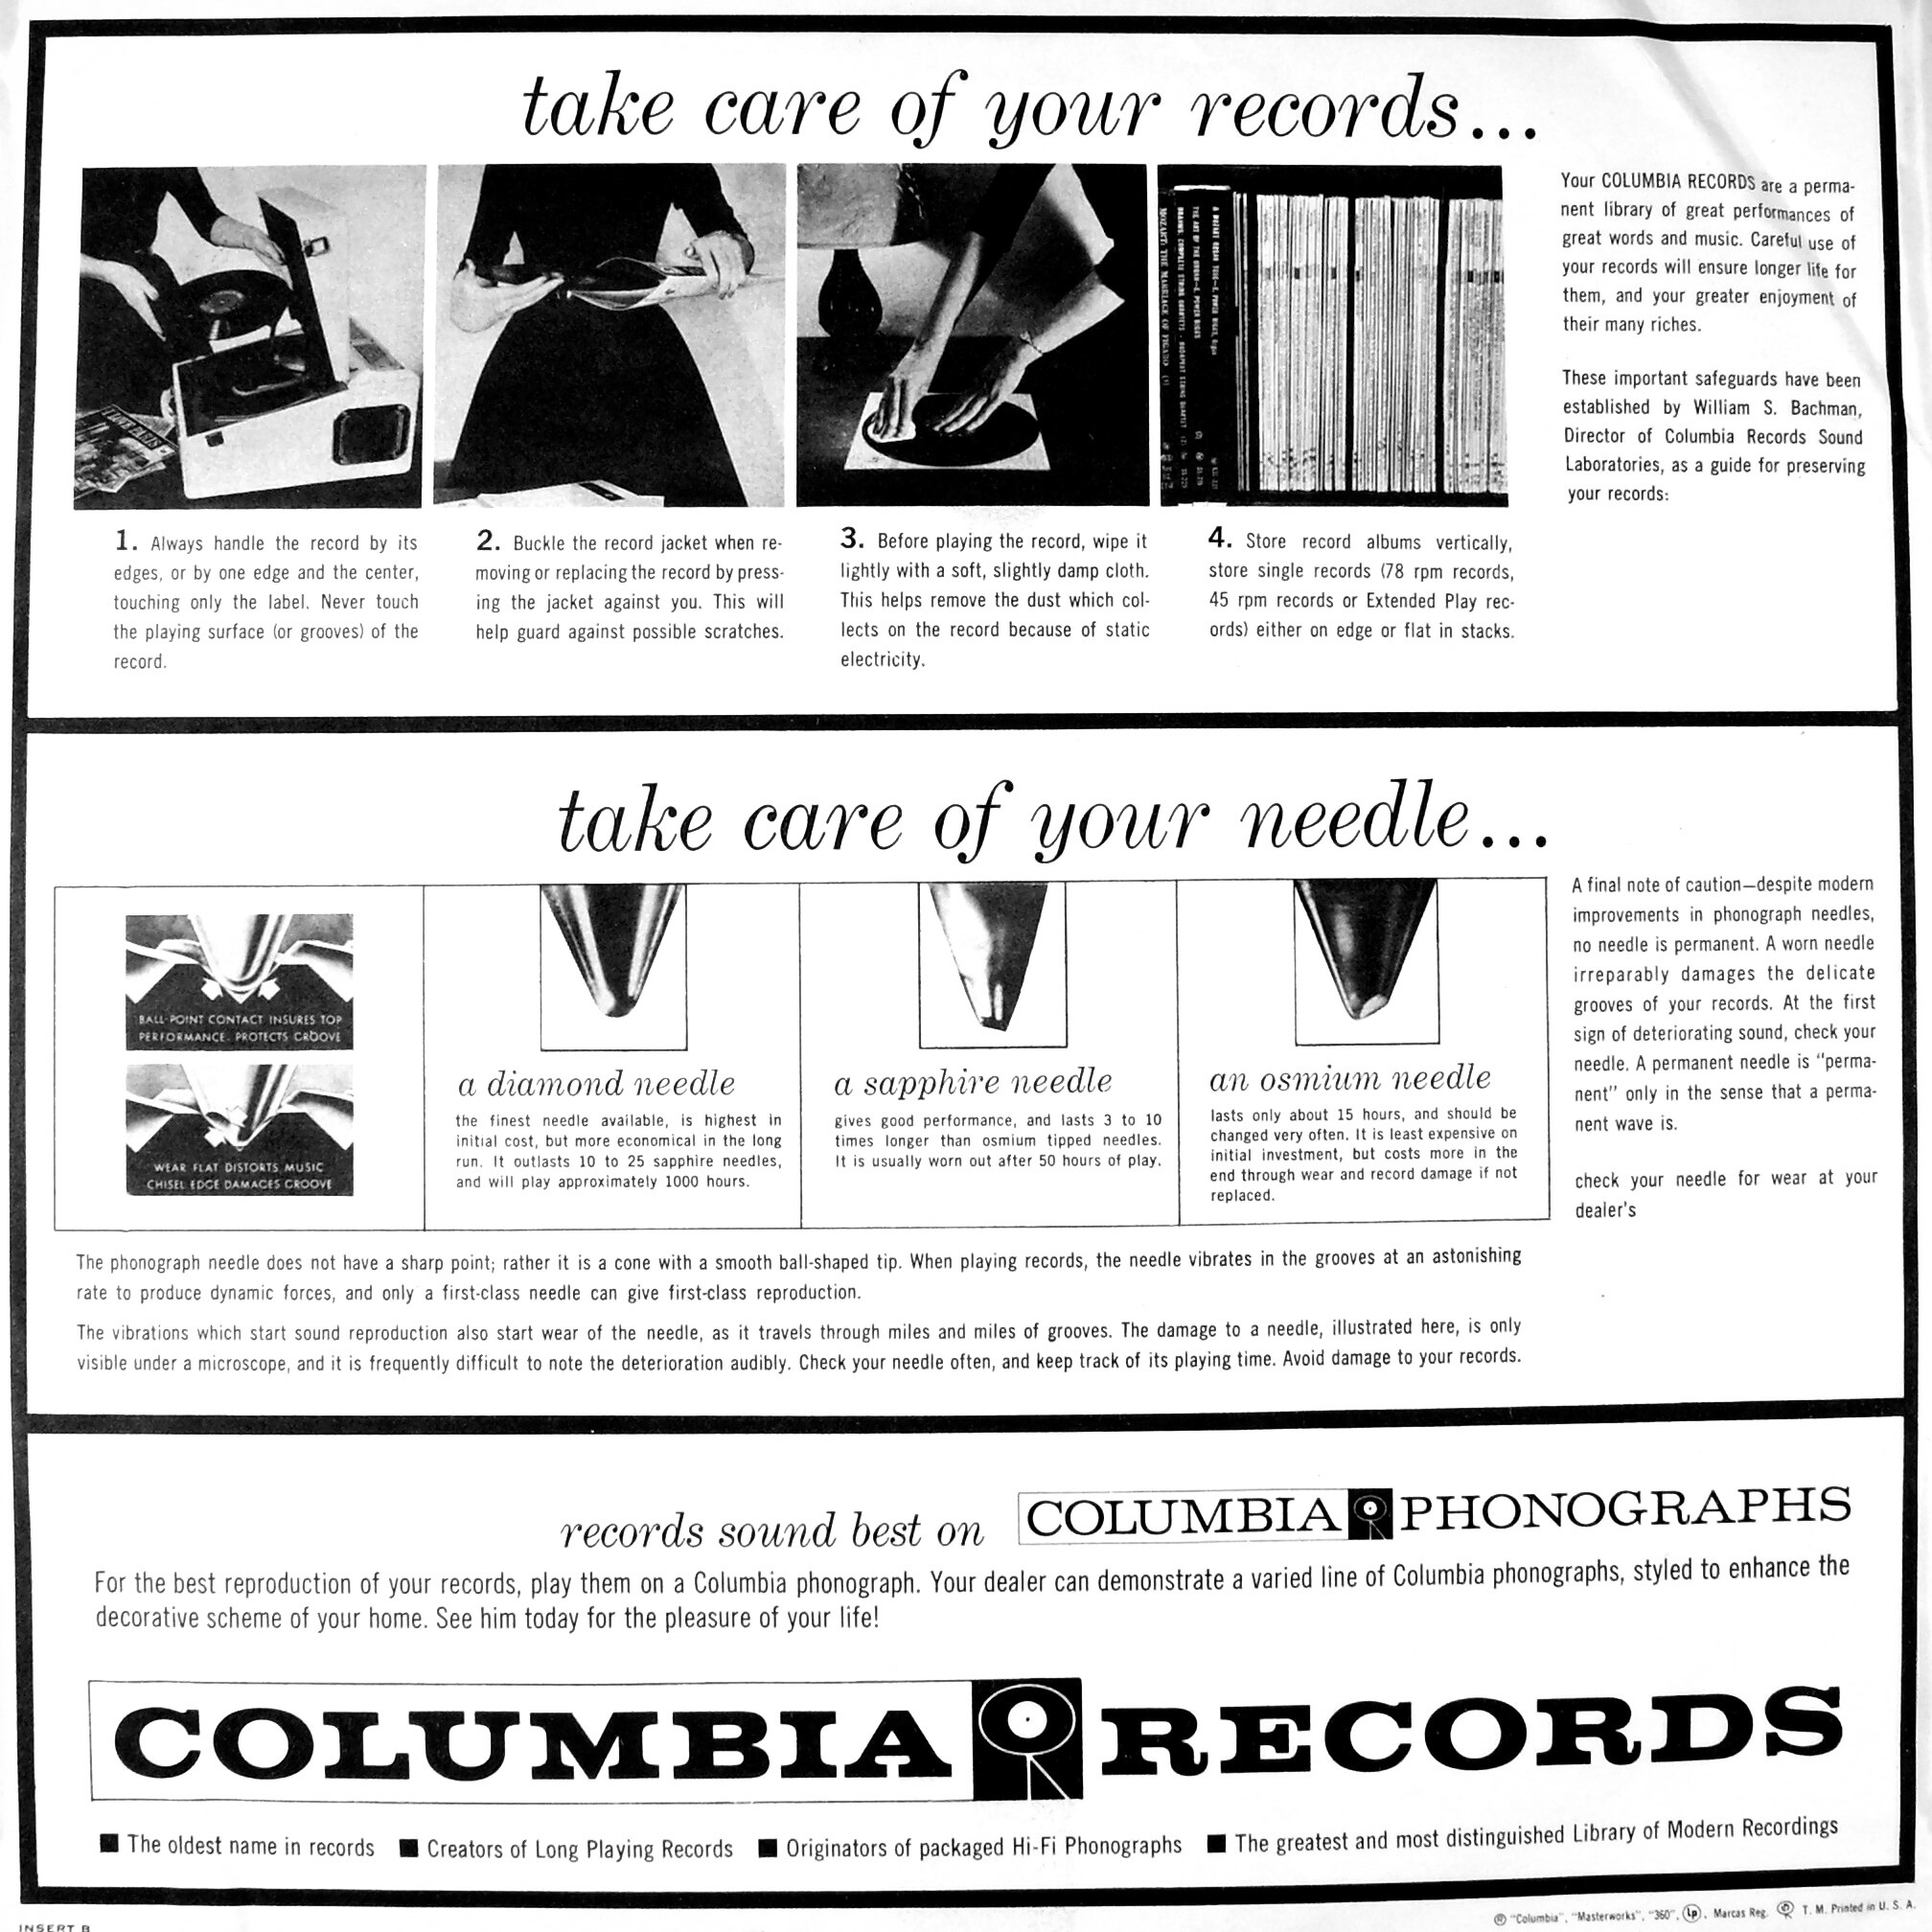 how-to-care-for-vinyl-records-according-to-columbia-records-in-1957-back